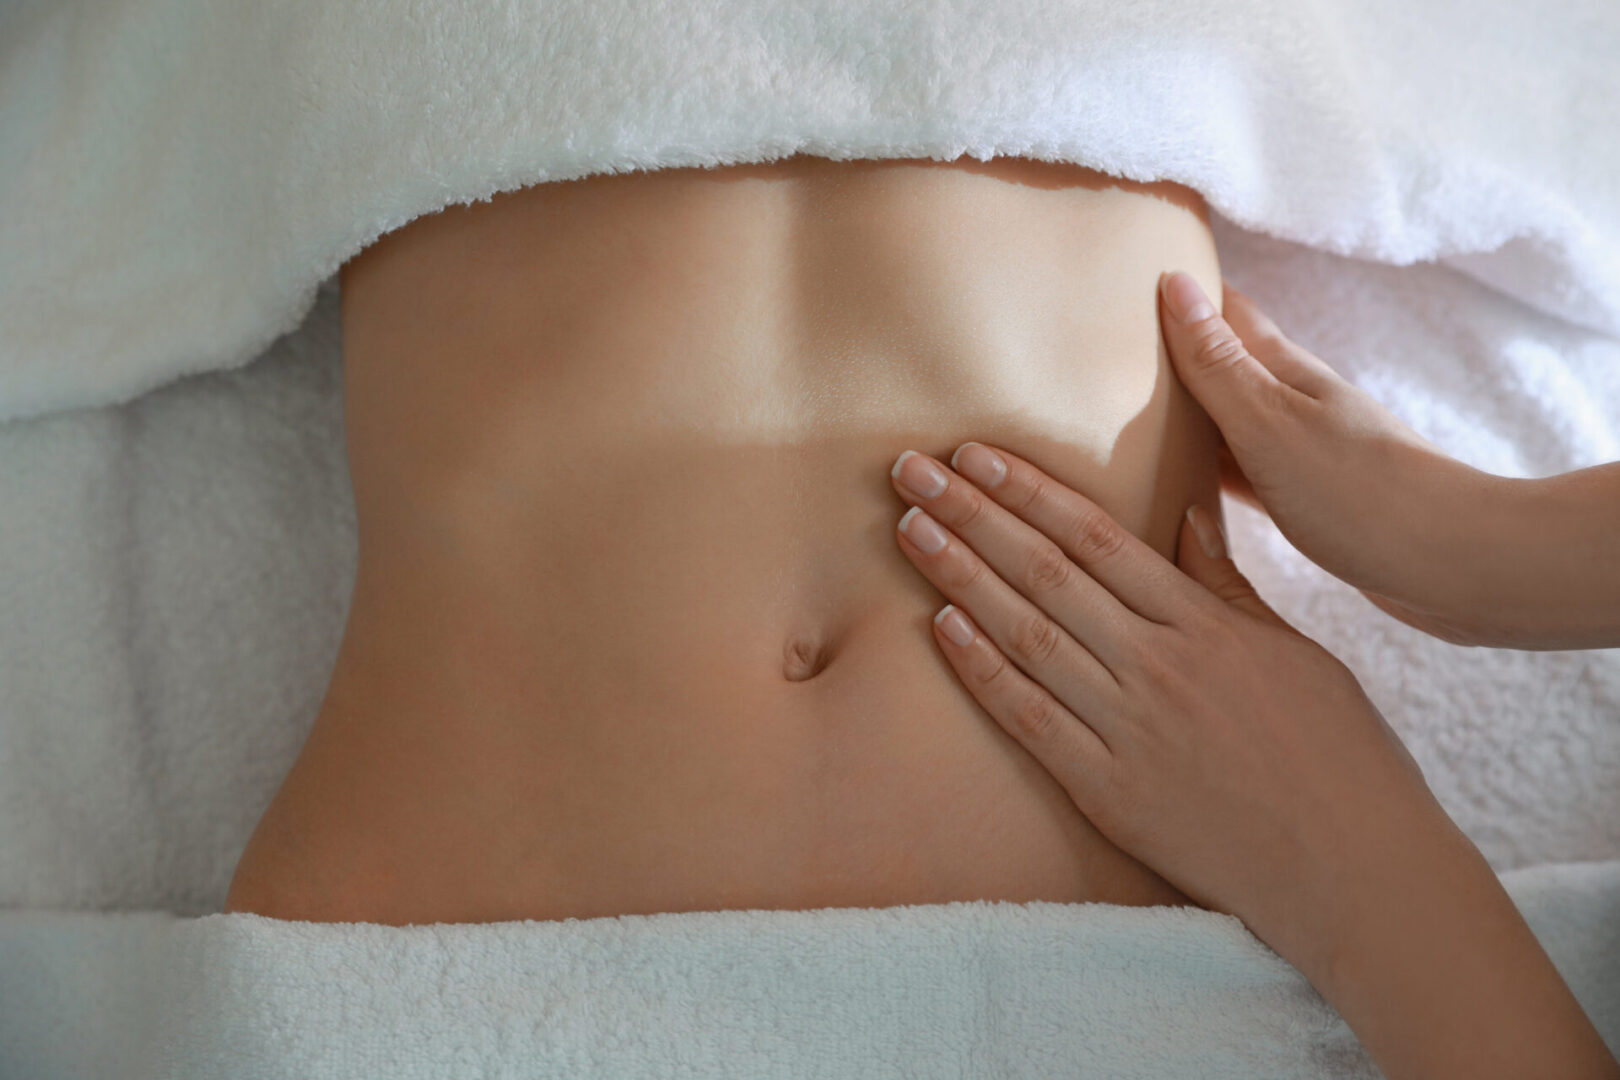 Woman receiving lymphatic drainage massage on her abdomen to help with her digestion, bloating, and detoxification